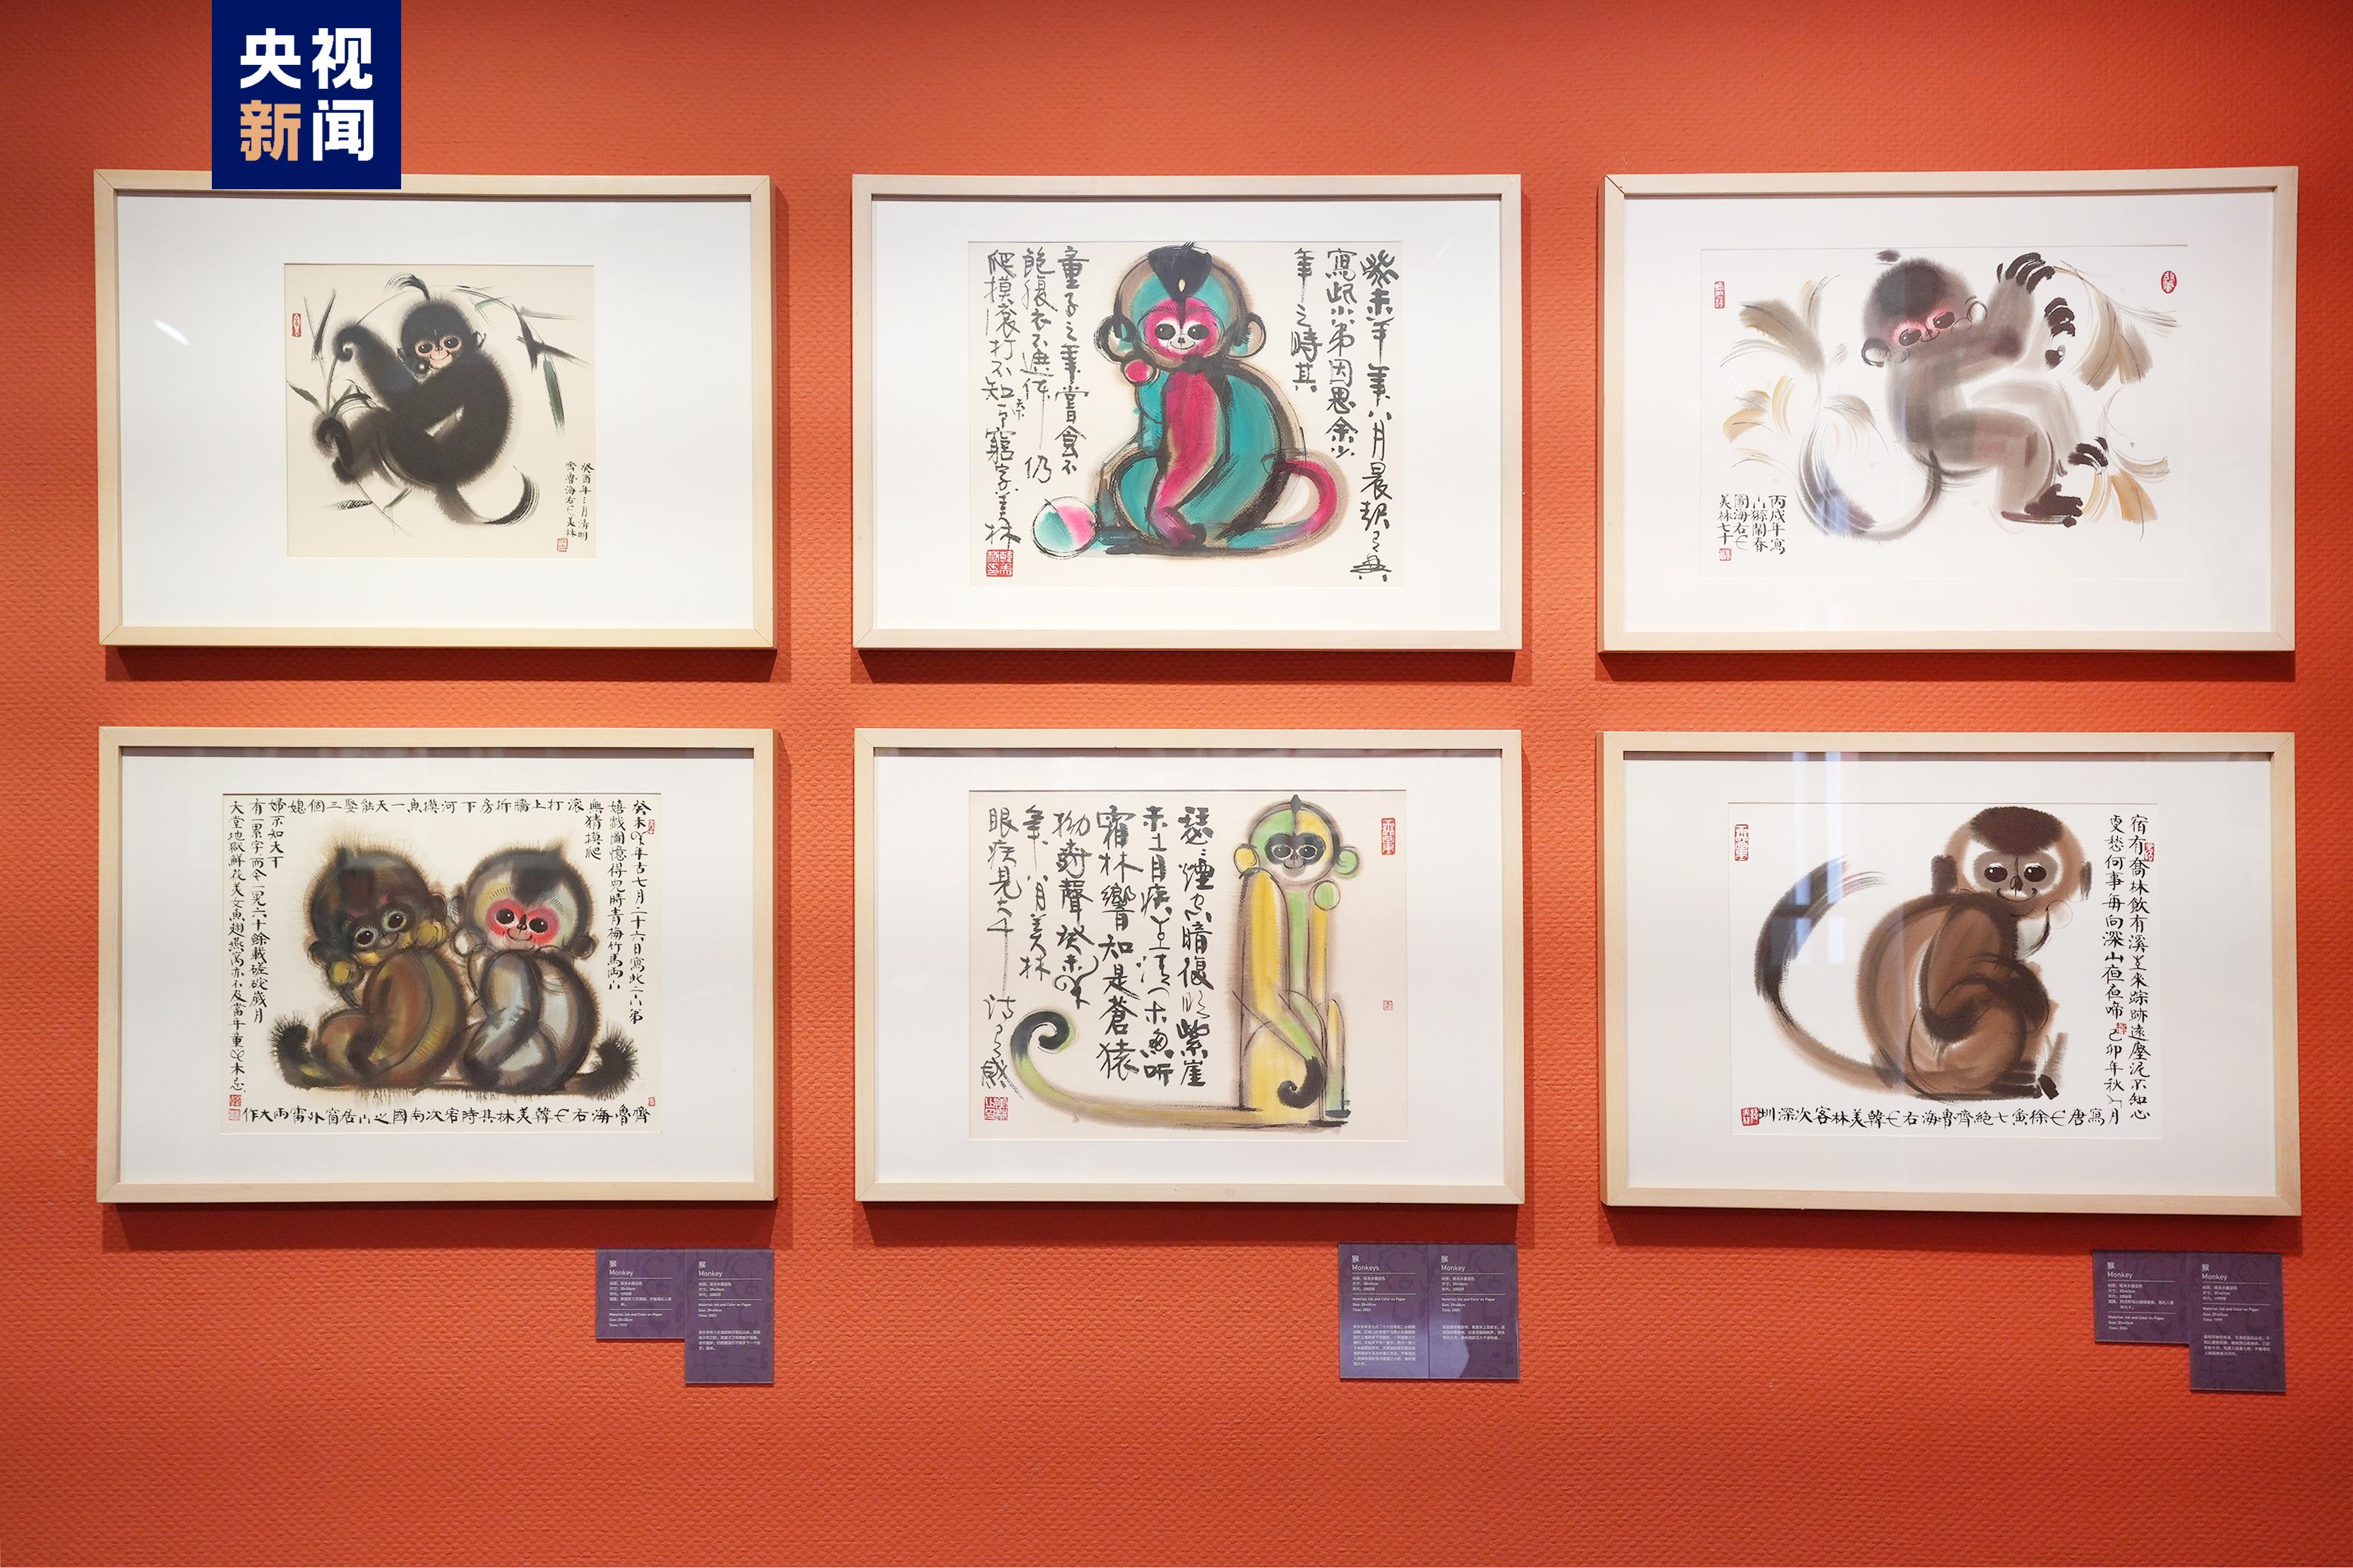 Han Meilin's 12 Chinese zodiac-themed works are on display at the Qingdao Art Museum in Shandong, March 26, 2023. /CCTV